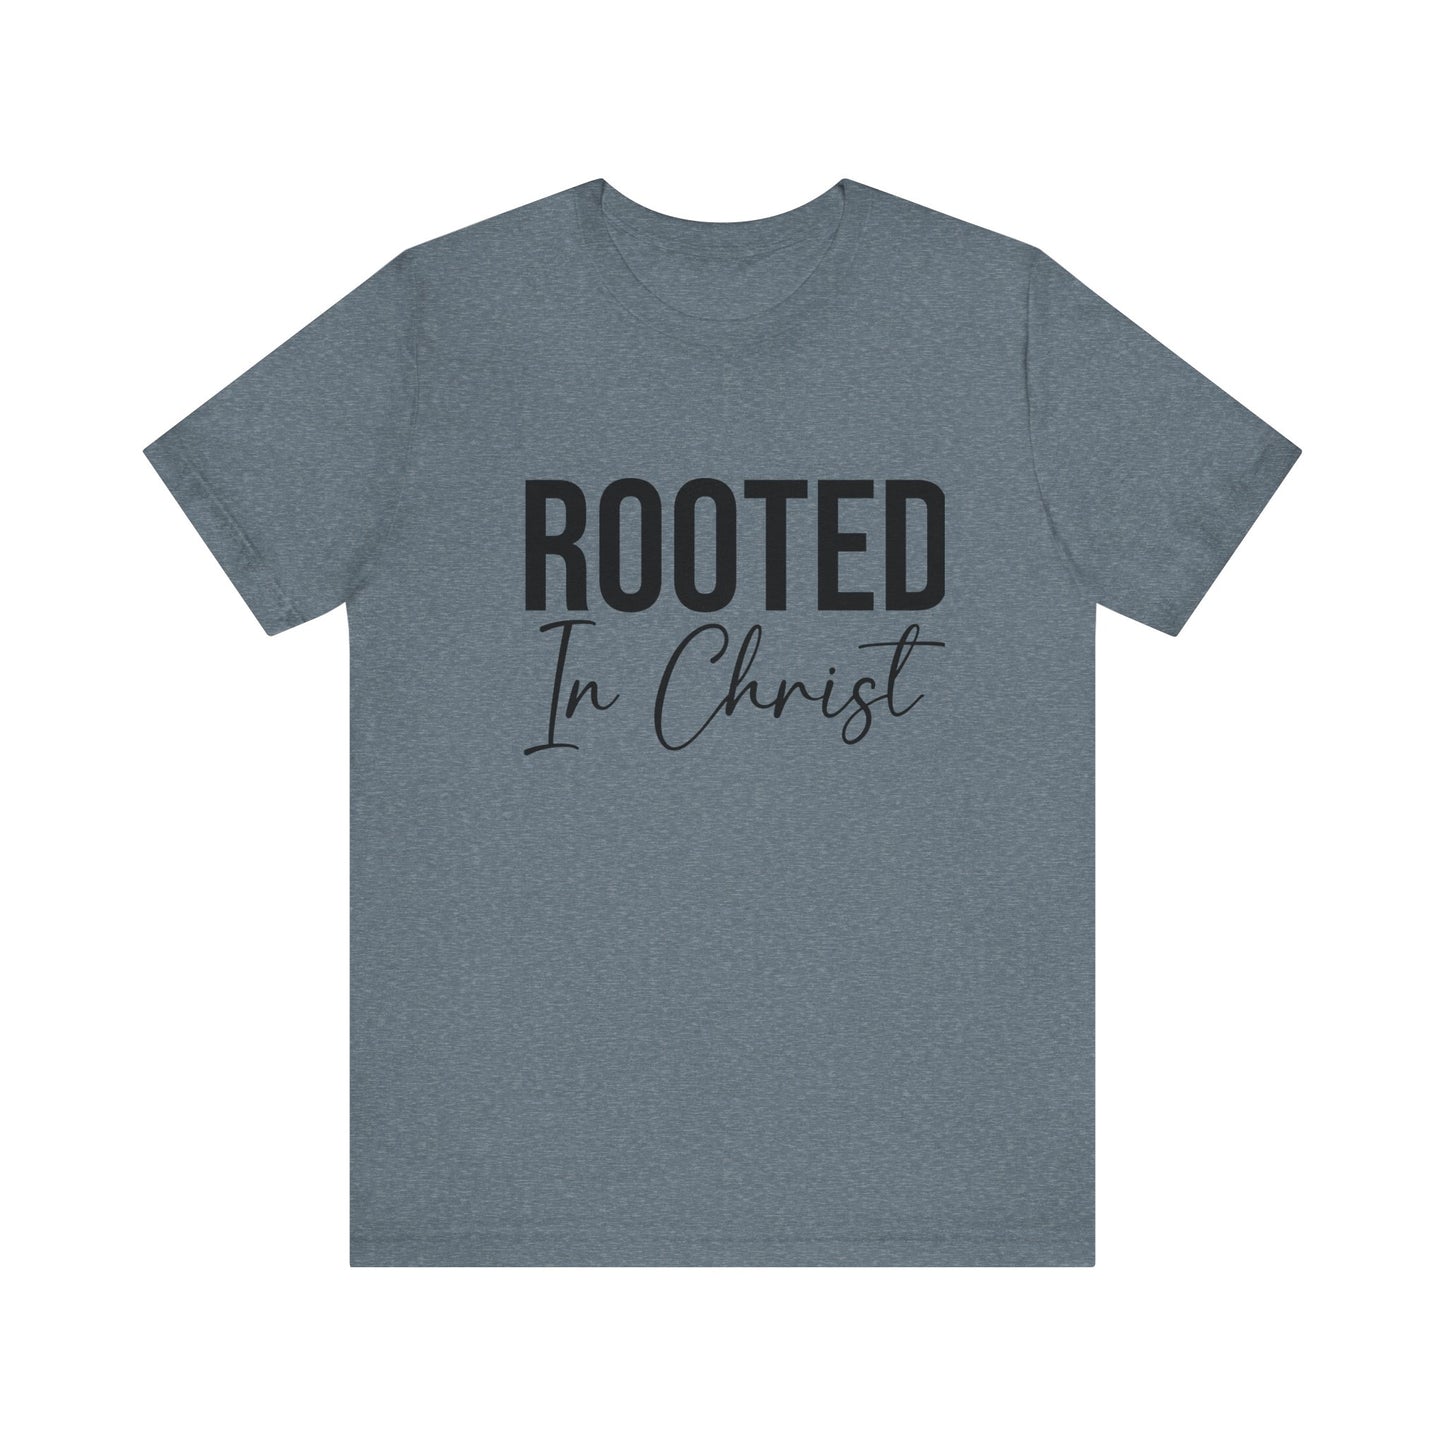 Rooted in Christ Women's Short Sleeve Tee